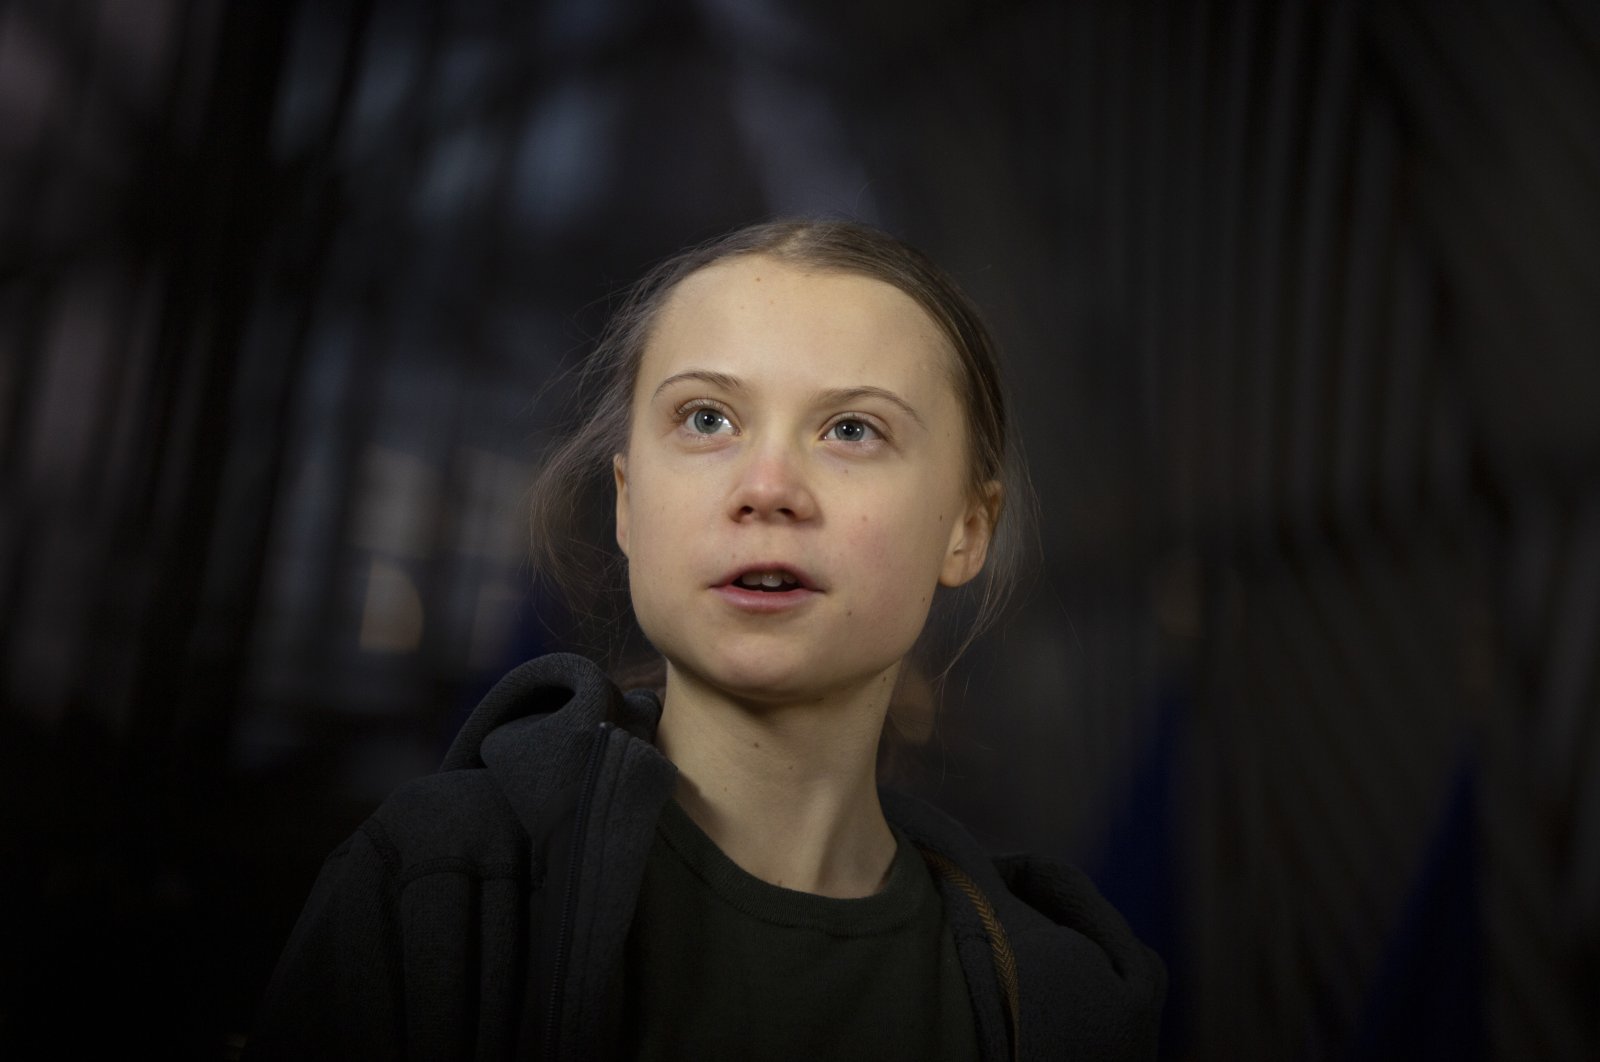 Swedish teenage activist Greta Thunberg speaks with the media as she arrives for a meeting of the Environment Council at the European Council building in Brussels, Belgium, March 5, 2020. (AP File Photo)